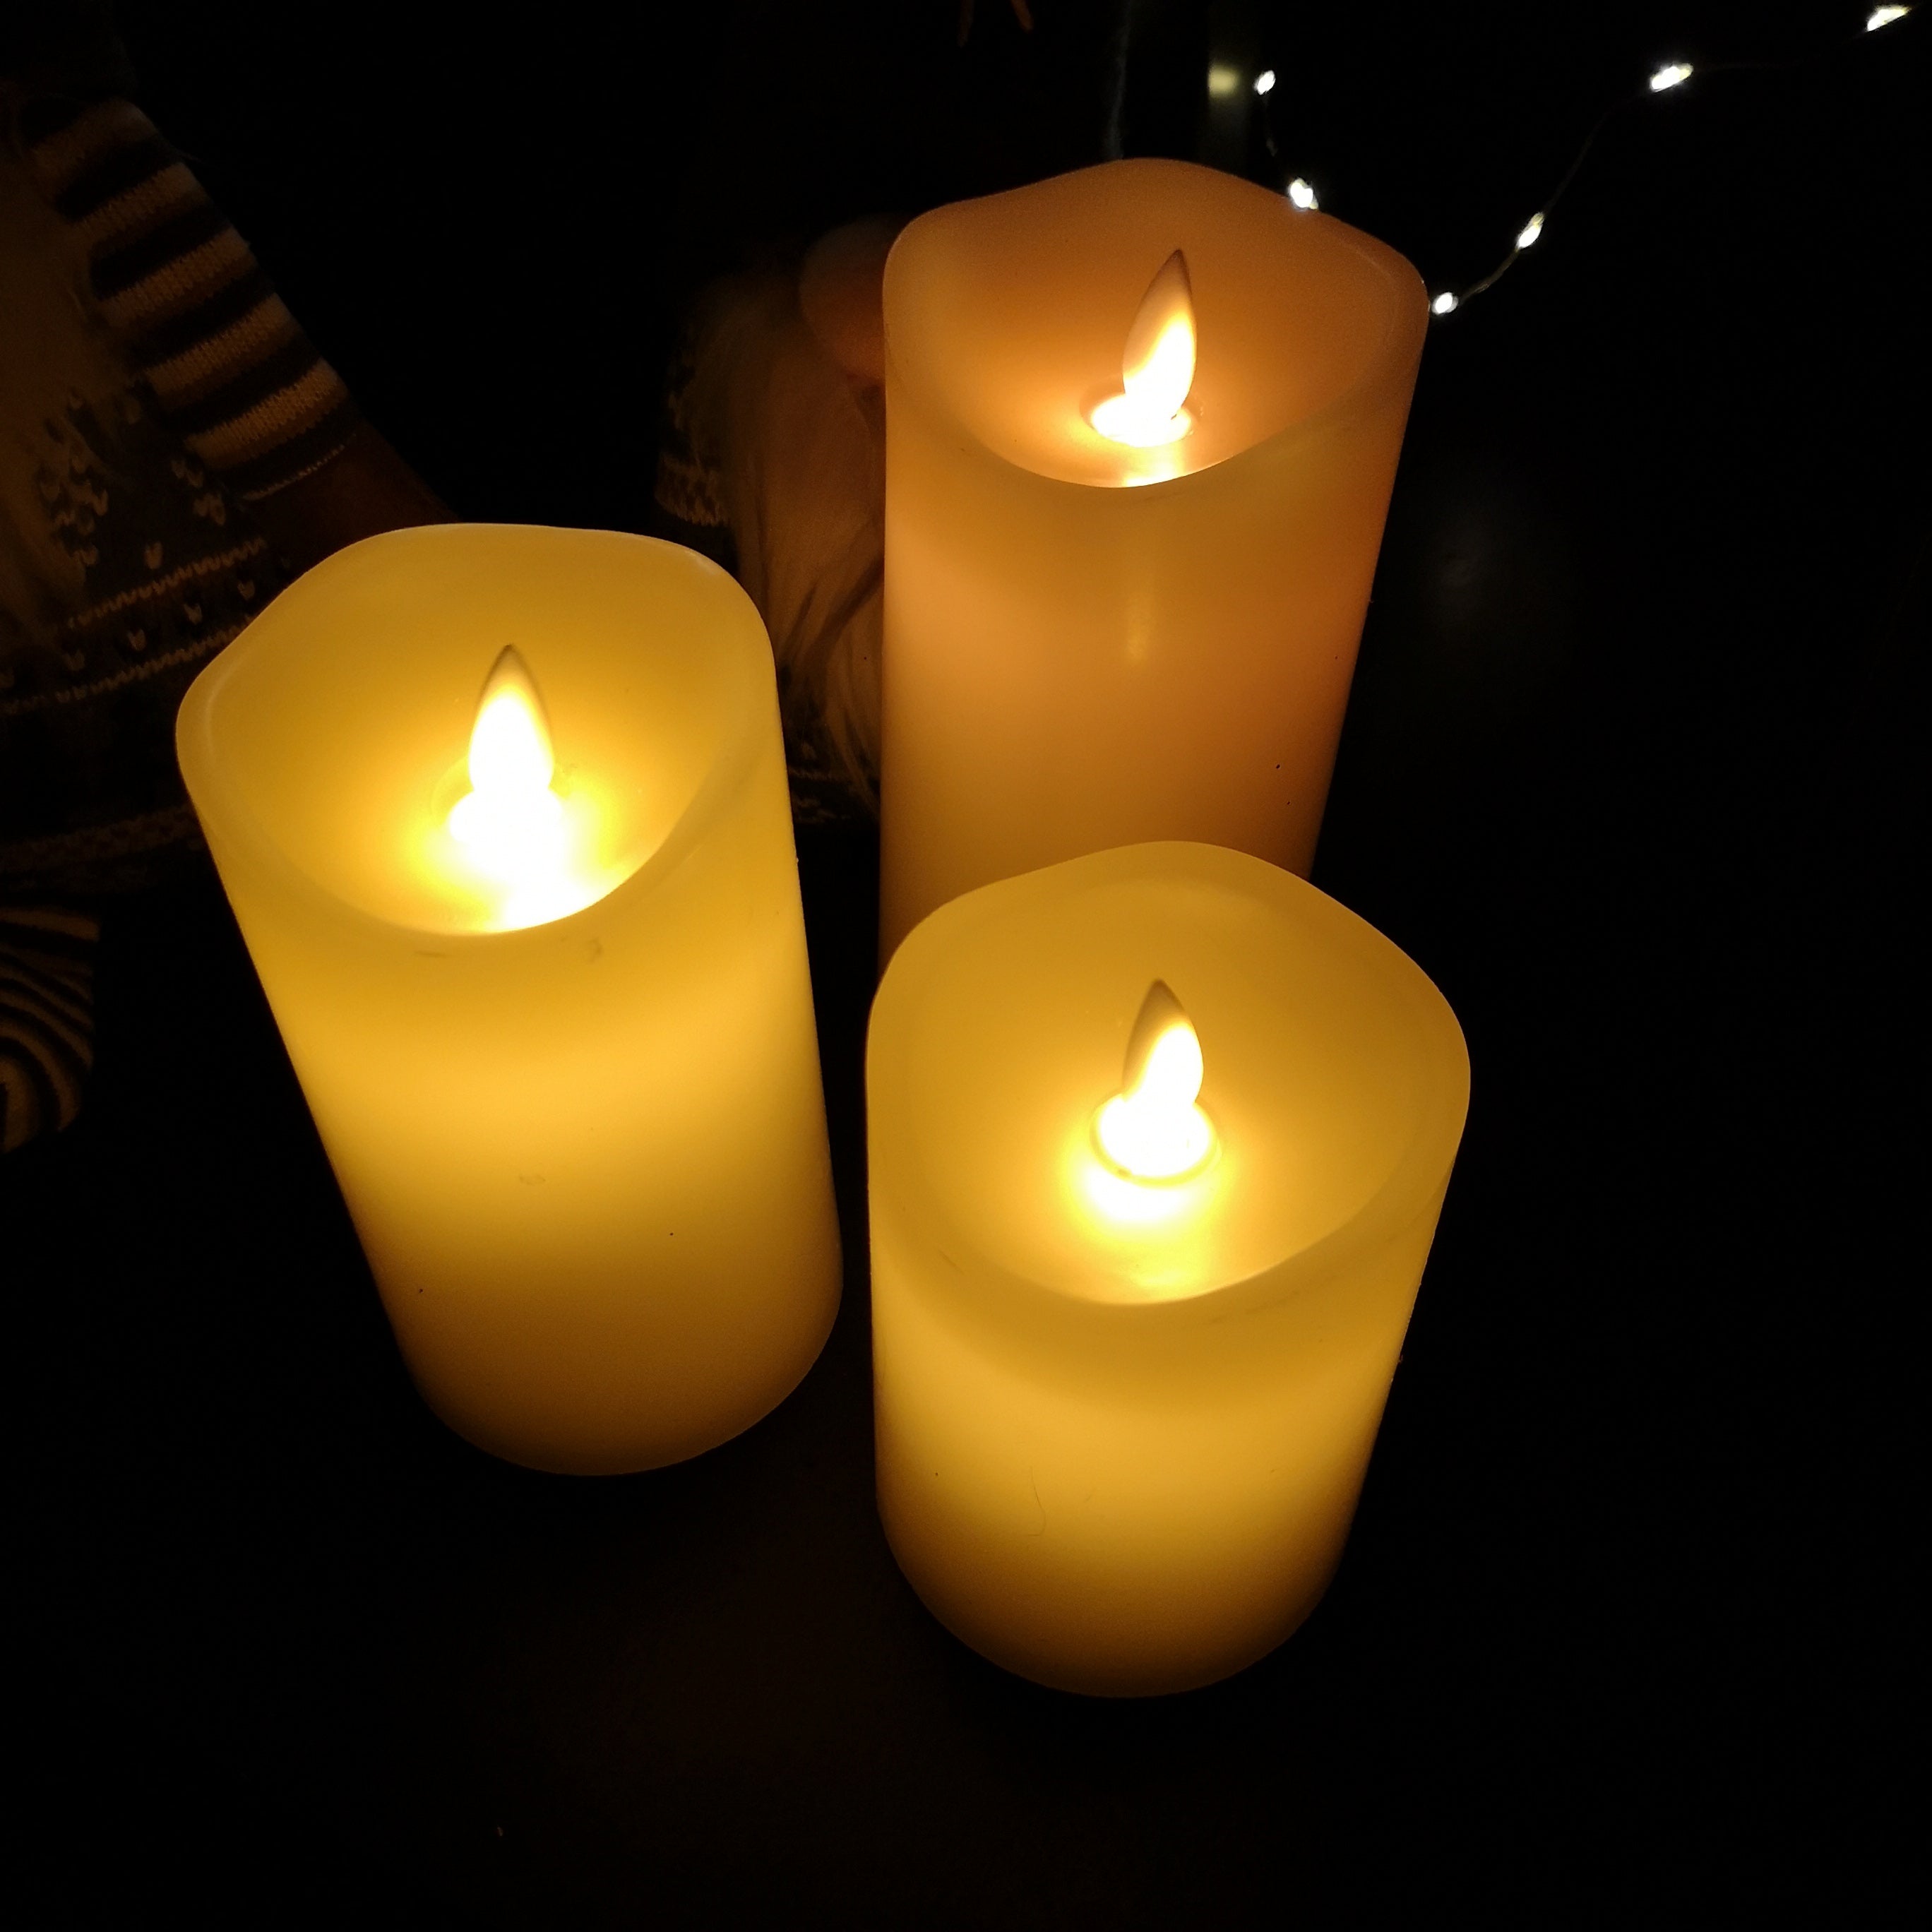 Premier Set of 3 Battery Operated Dancing Flame Candles in Cream